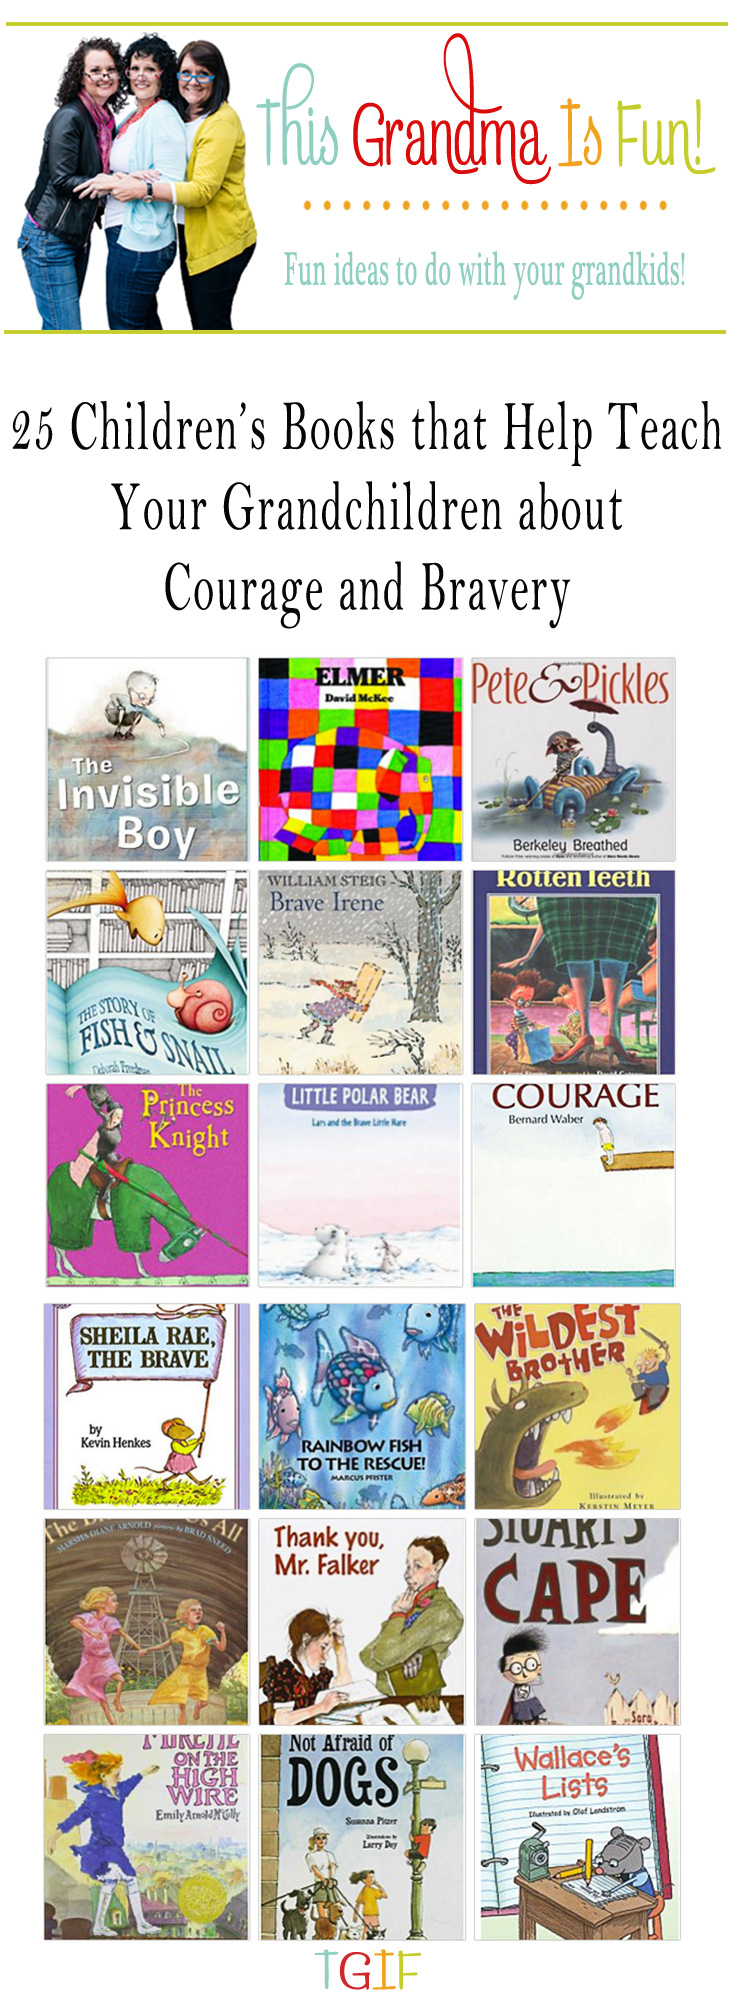 25 Children Books That Help Teach Your Grandchildren About Courage and Bravery Children learn important character lessons best when taught by example. All children are faced with situations where they need to have courage and bravery. Outside of situations that present physical danger, children need to learn courage and bravery in the social situations they will face in everyday life. They need the courage to stand up for what is right and bravery to stand up for those being mistreated. Most importantly they must learn to hold to their standards when faced with peer pressure. You can help your grandchildren learn these important character traits by sharing and reading books like these that explore different types of courage and bravery in engaging and powerful stories.